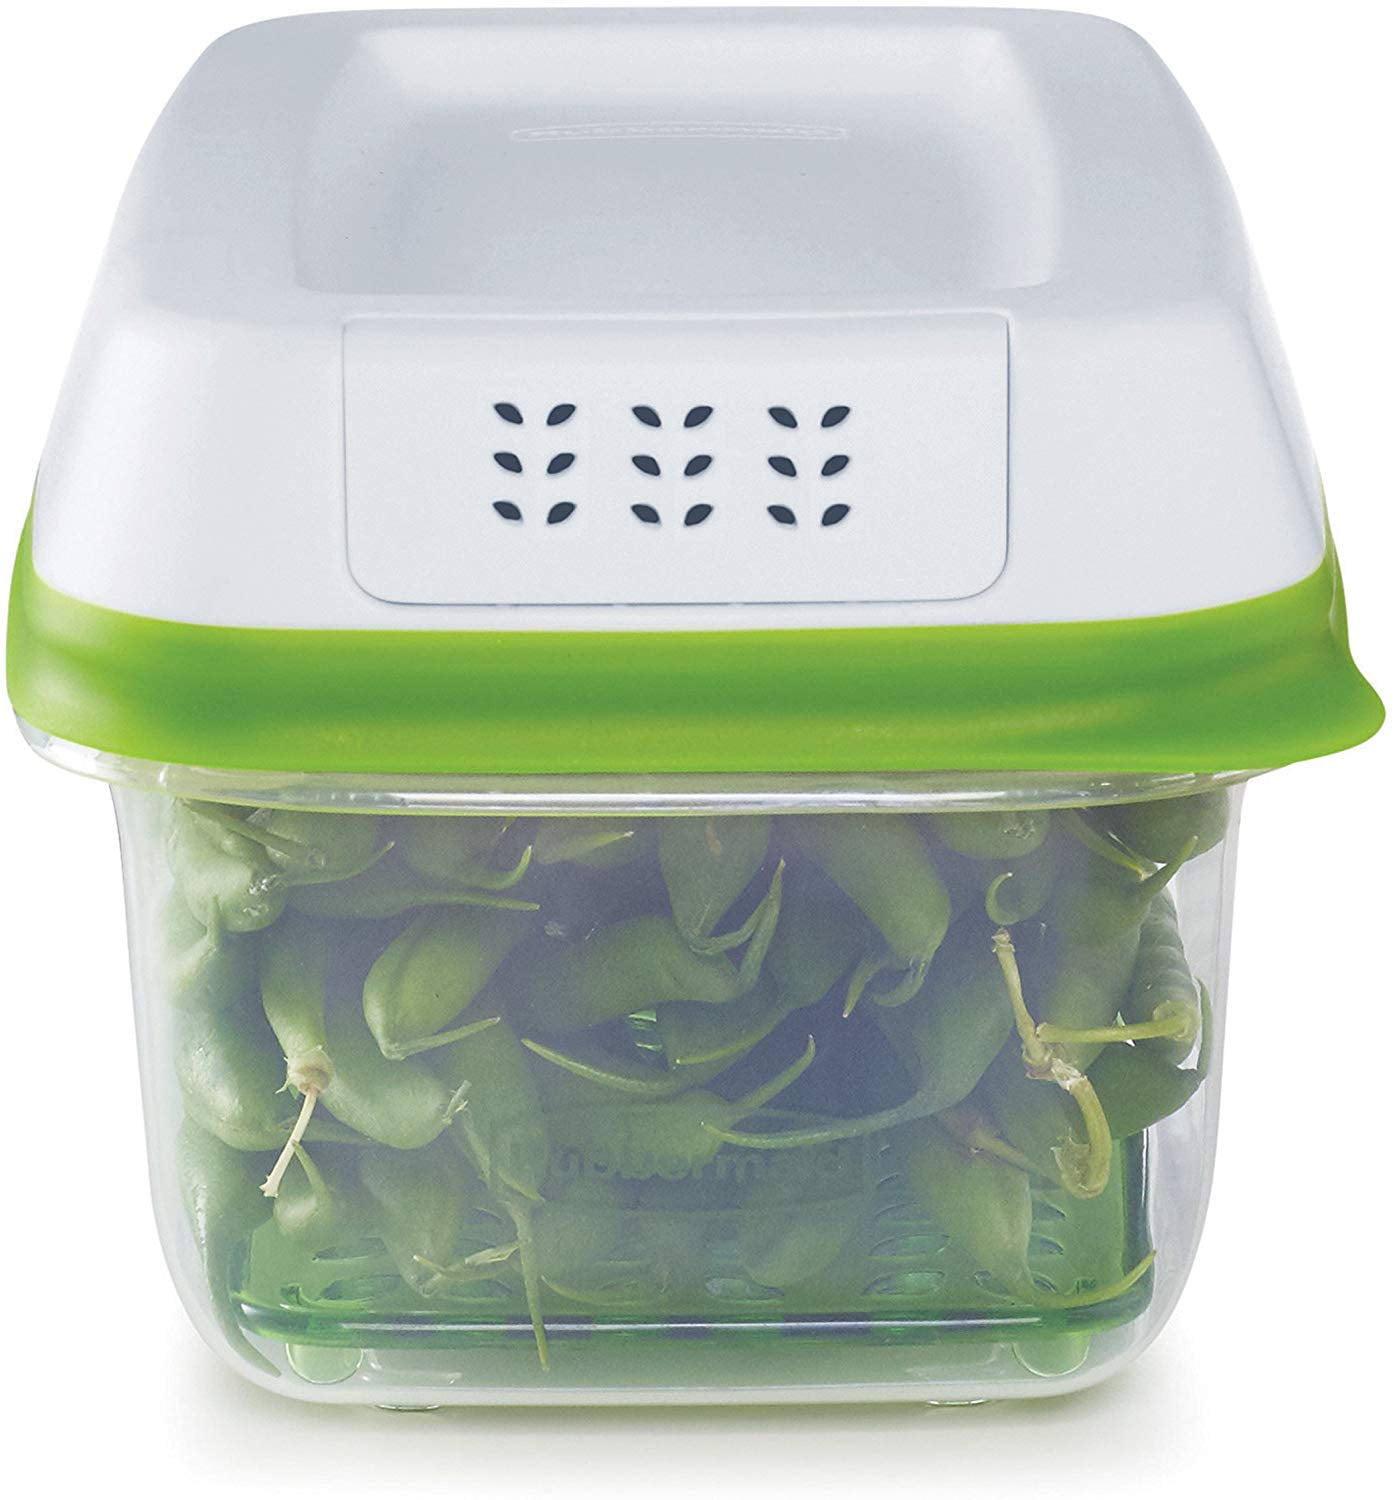 Rubbermaid® Fresh Works™ Produce Saver Container - Green, 1 ct